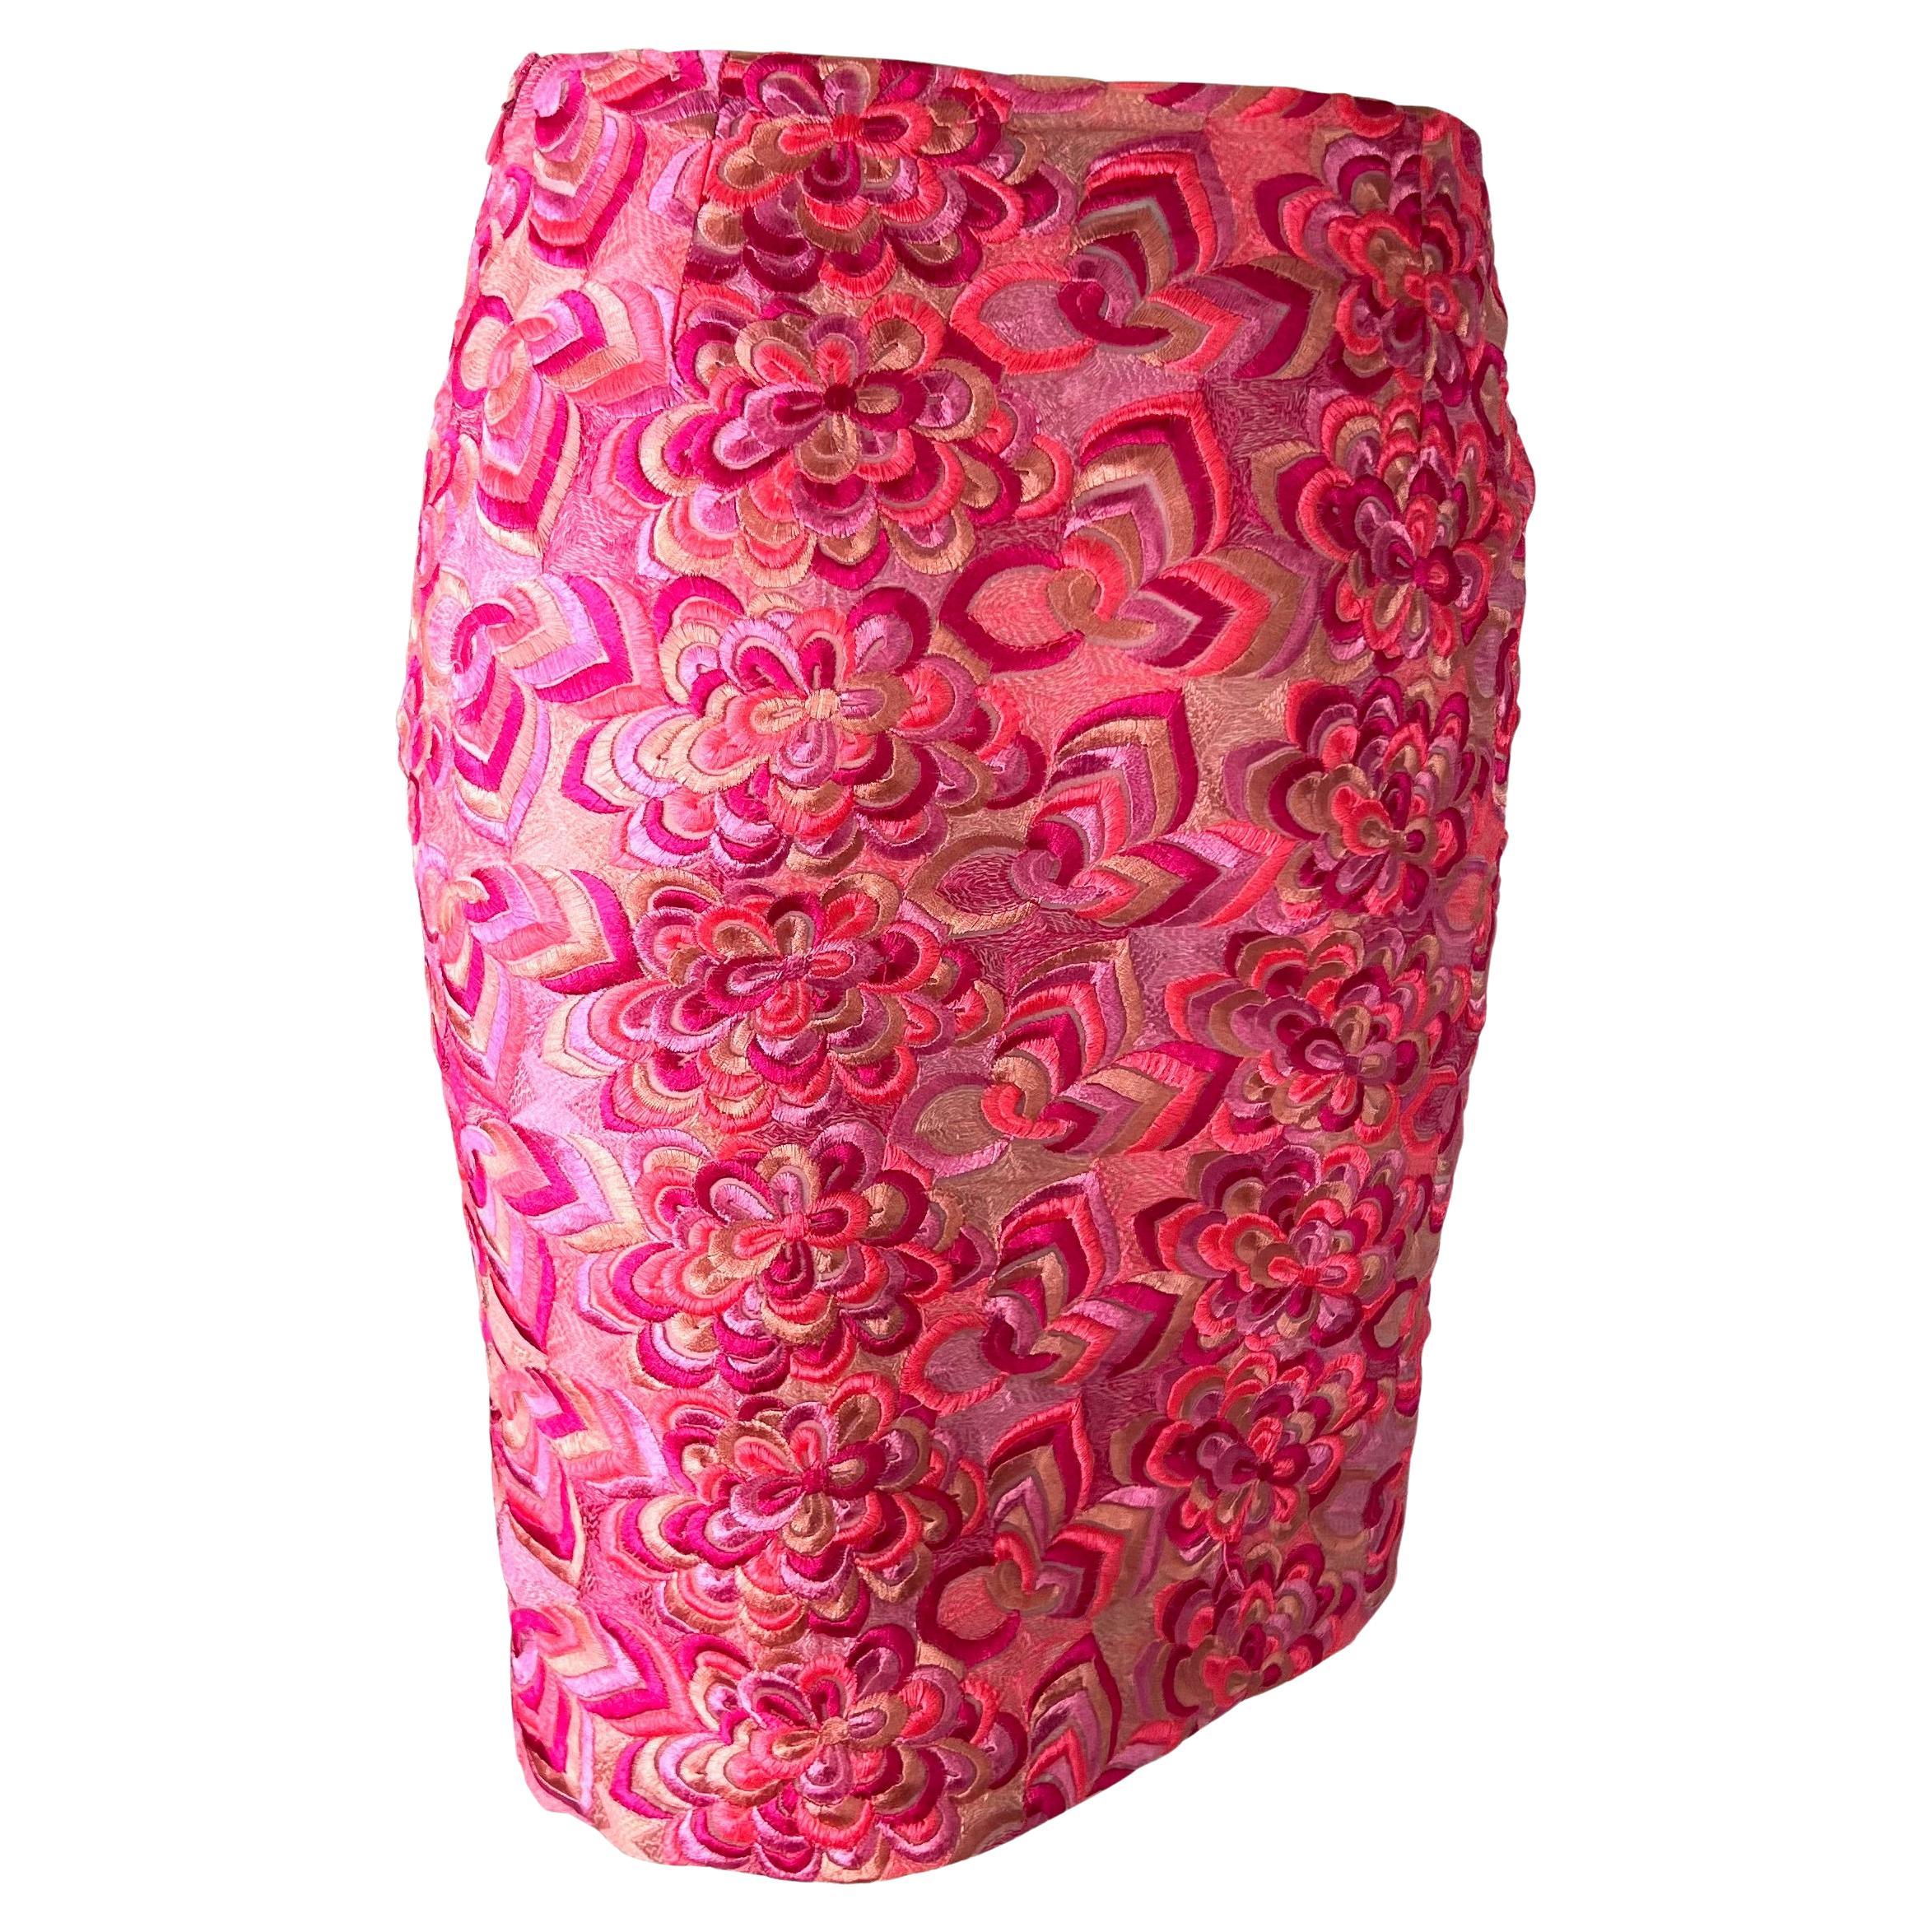 Women's S/S 2000 Gianni Versace by Donatella Neon Pink Floral Embroidered Skirt For Sale